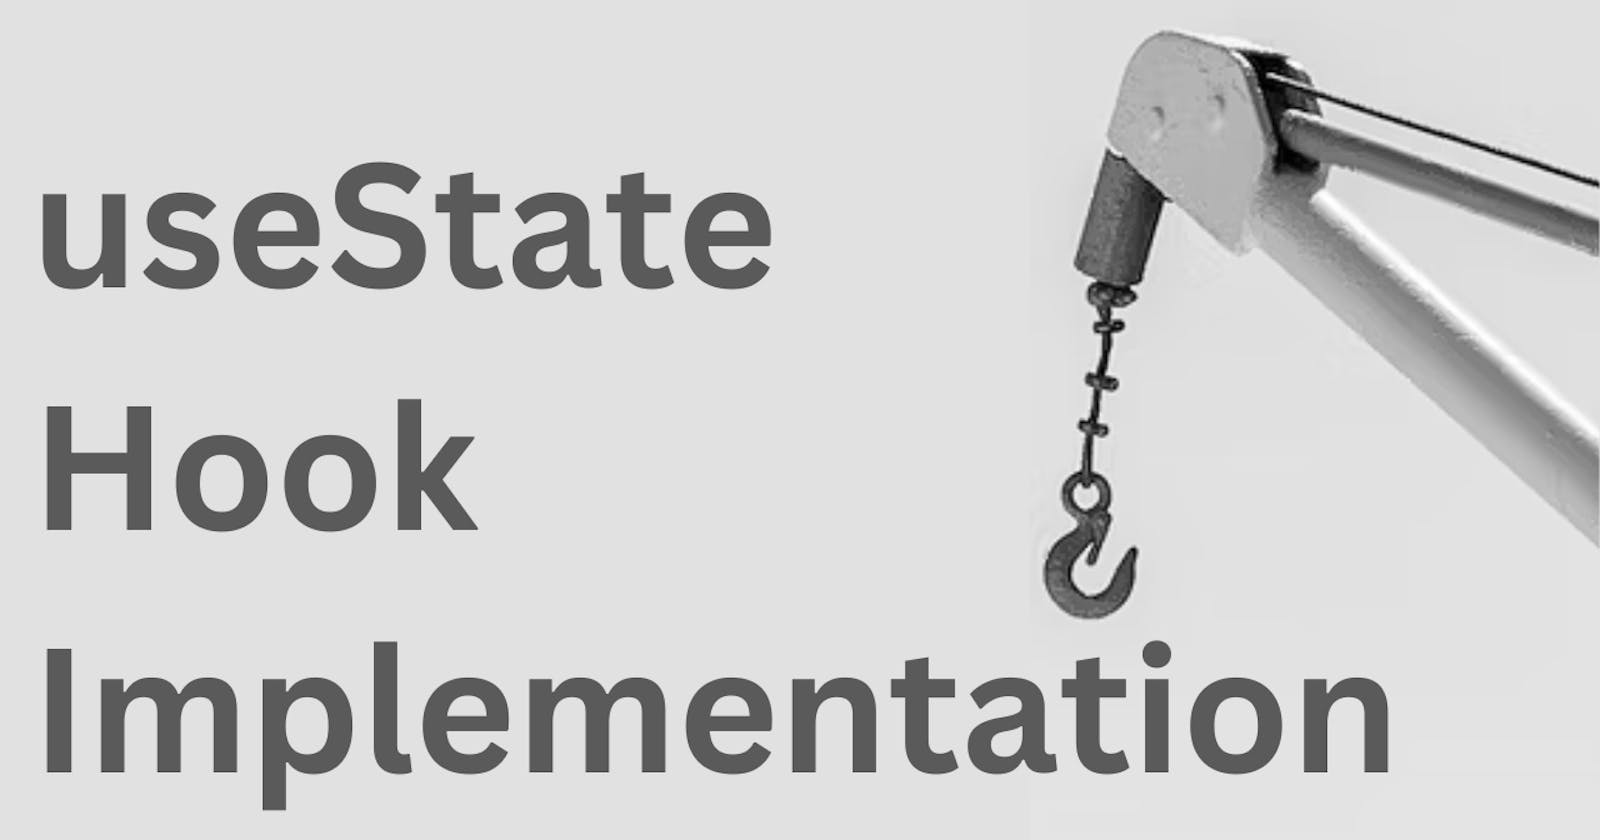 useState Hook Implementation - State Management in JavaScript